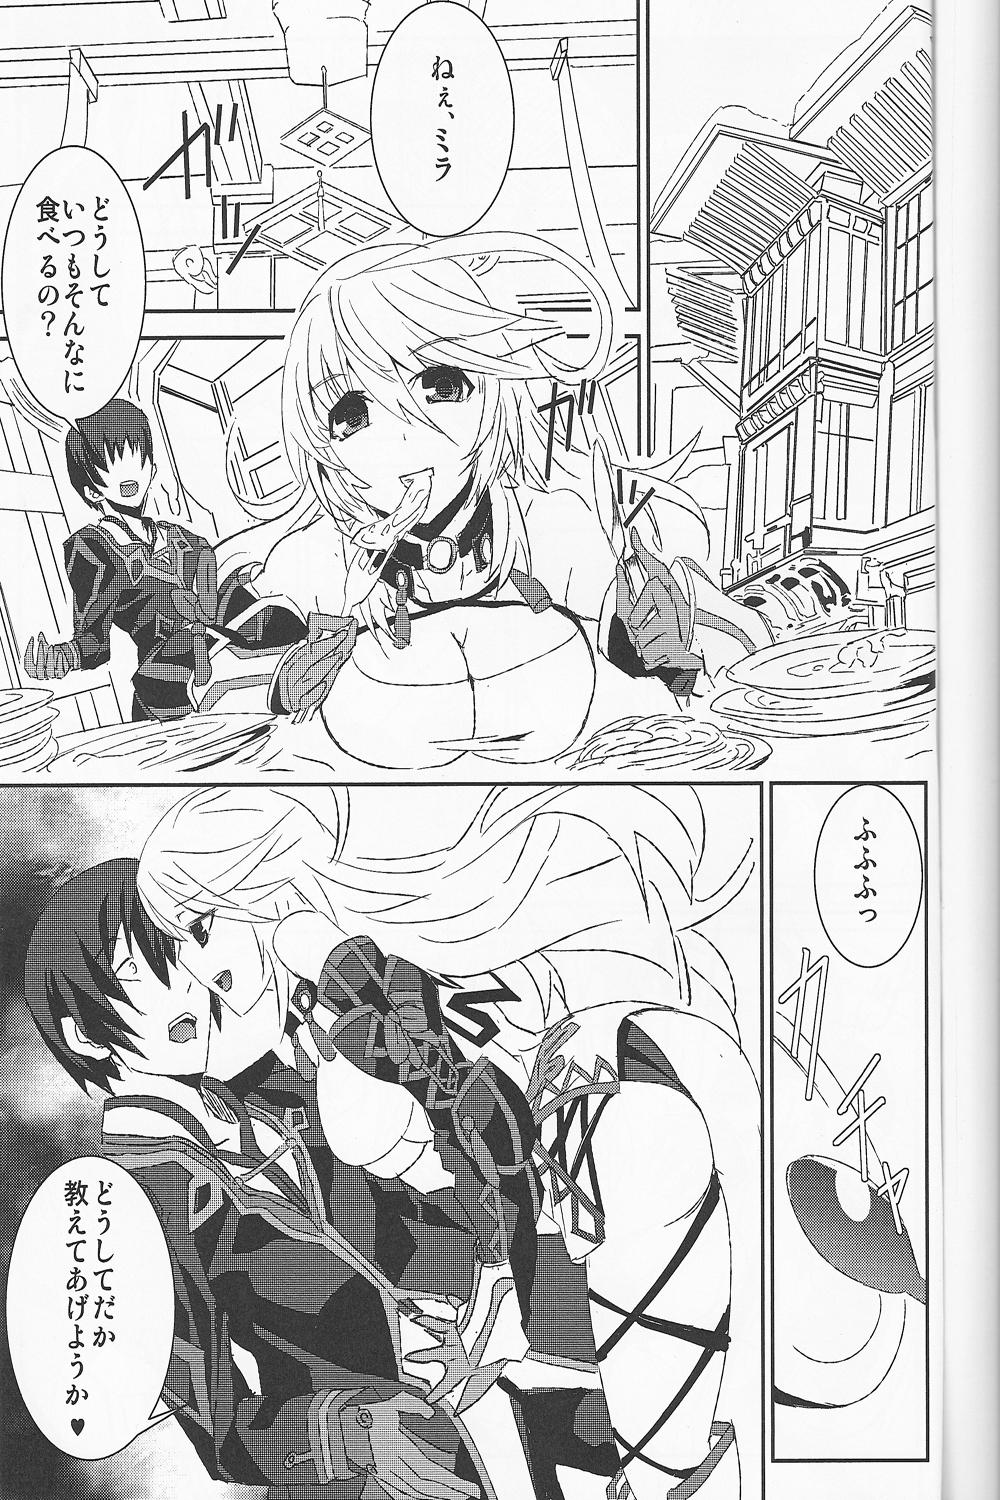 Colombian Locus - Tales of xillia Missionary Porn - Page 2